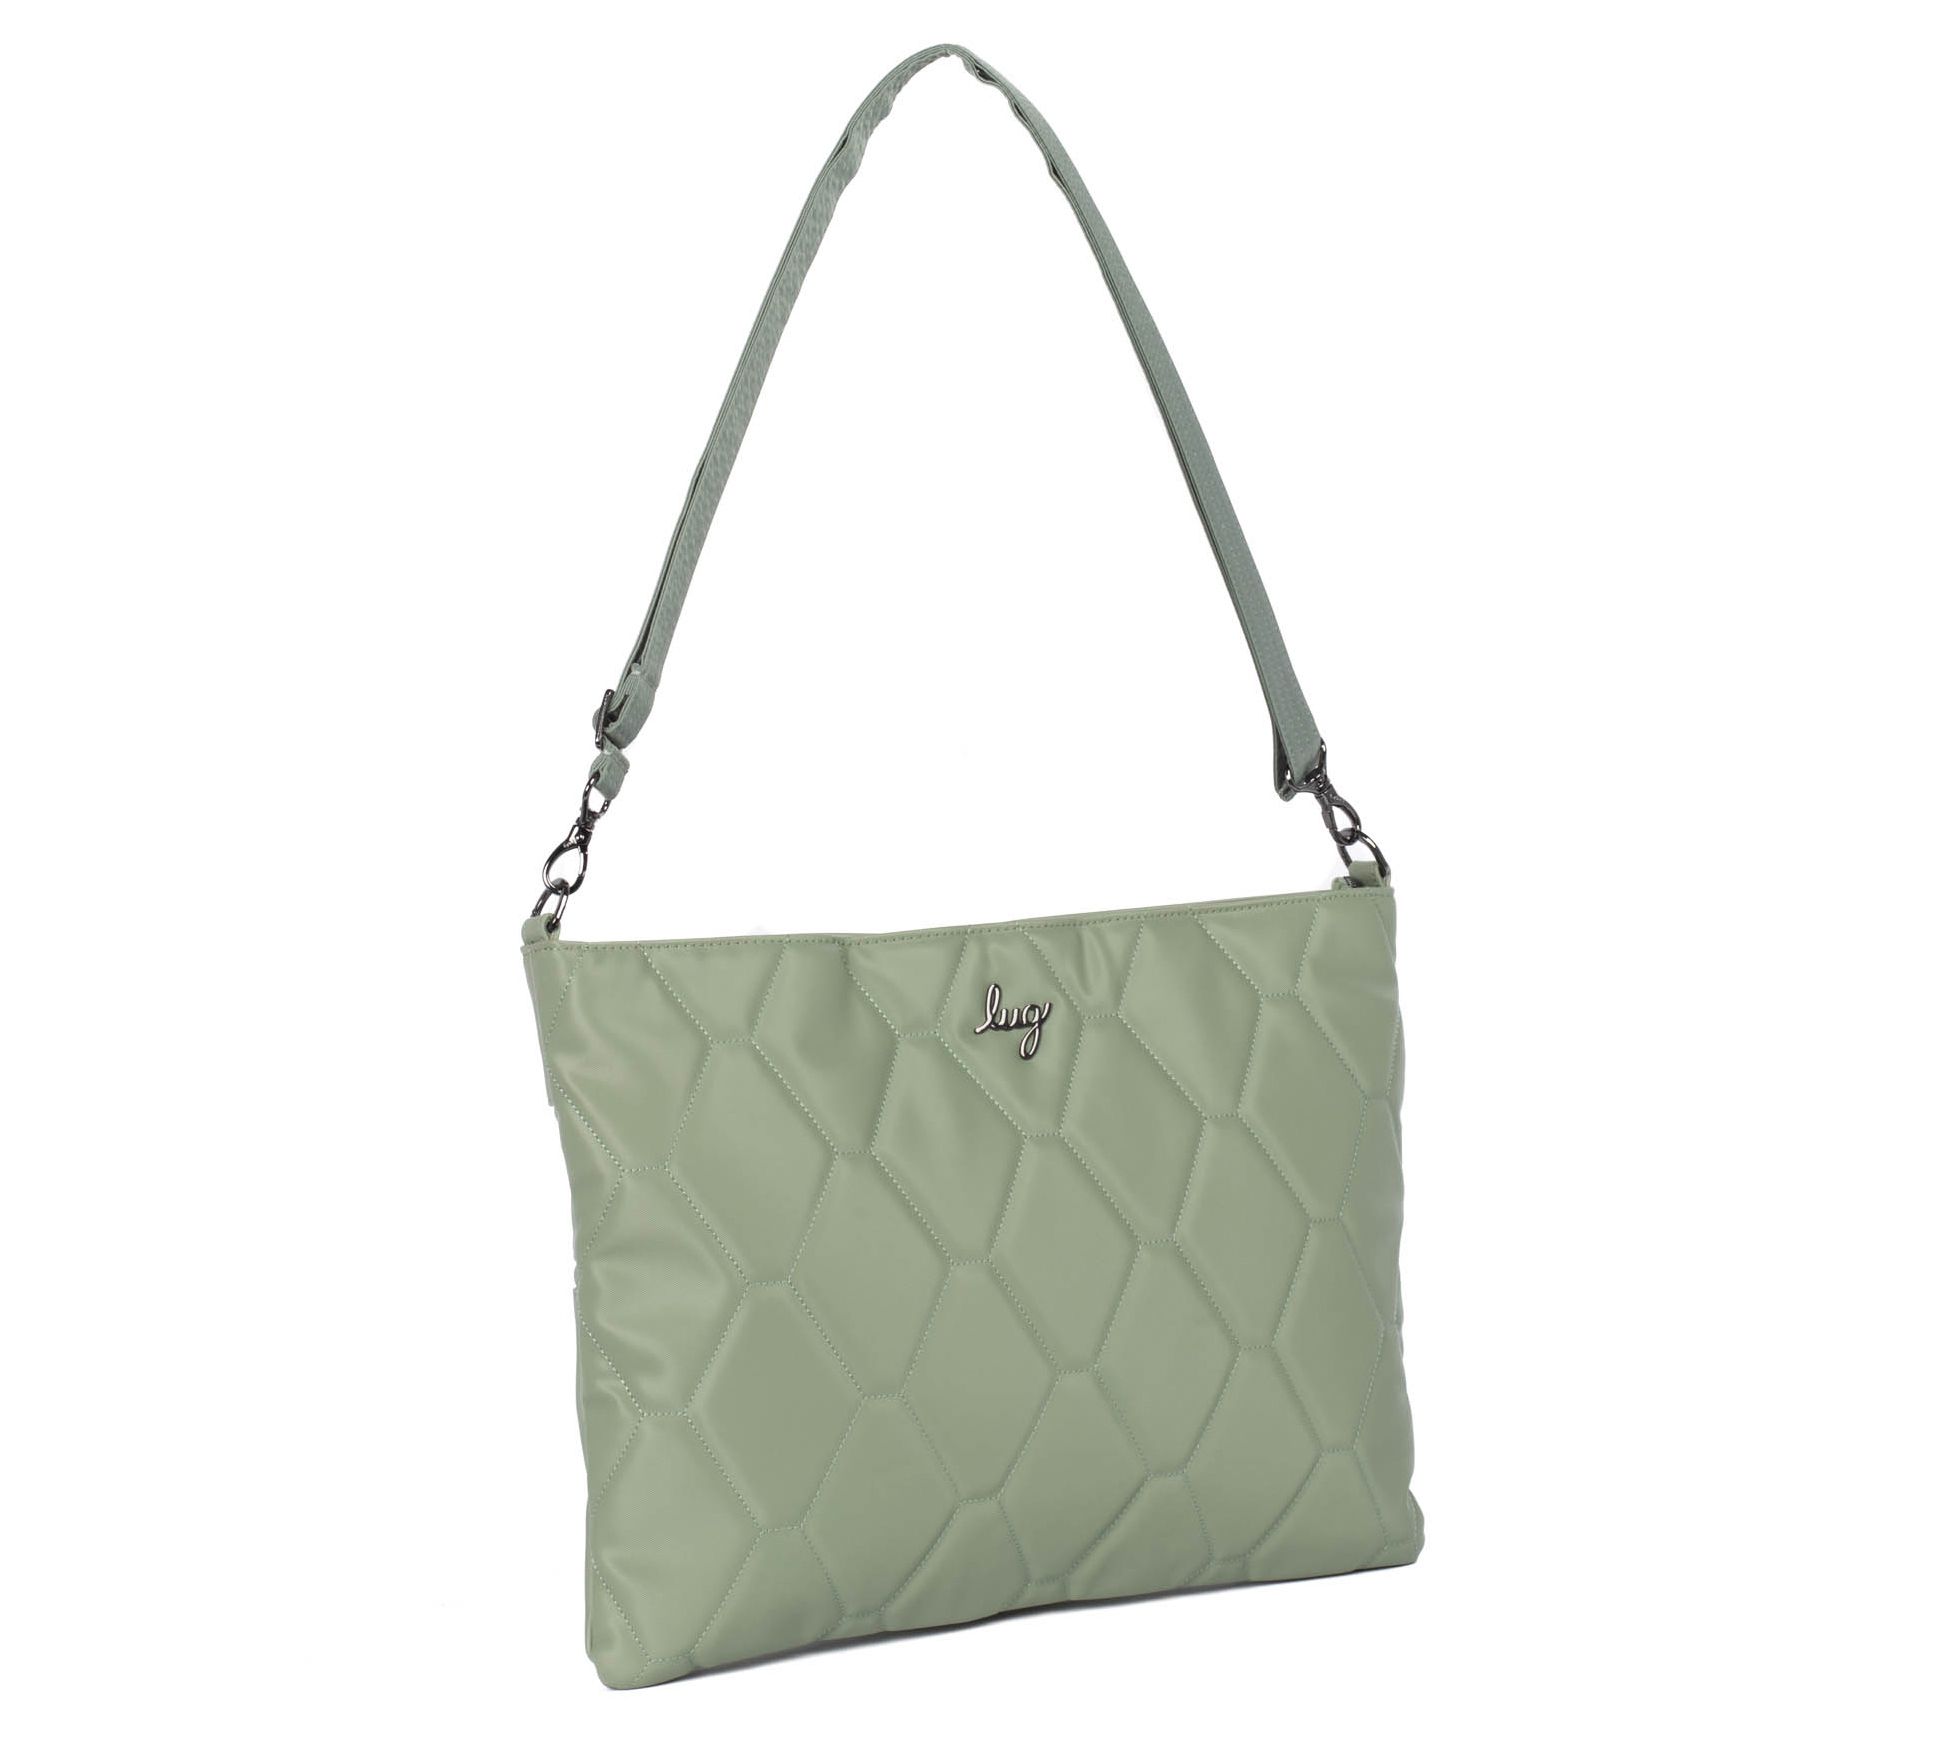 Lug Matte Luxe Crossbody with Tote Handles - Dory Medium